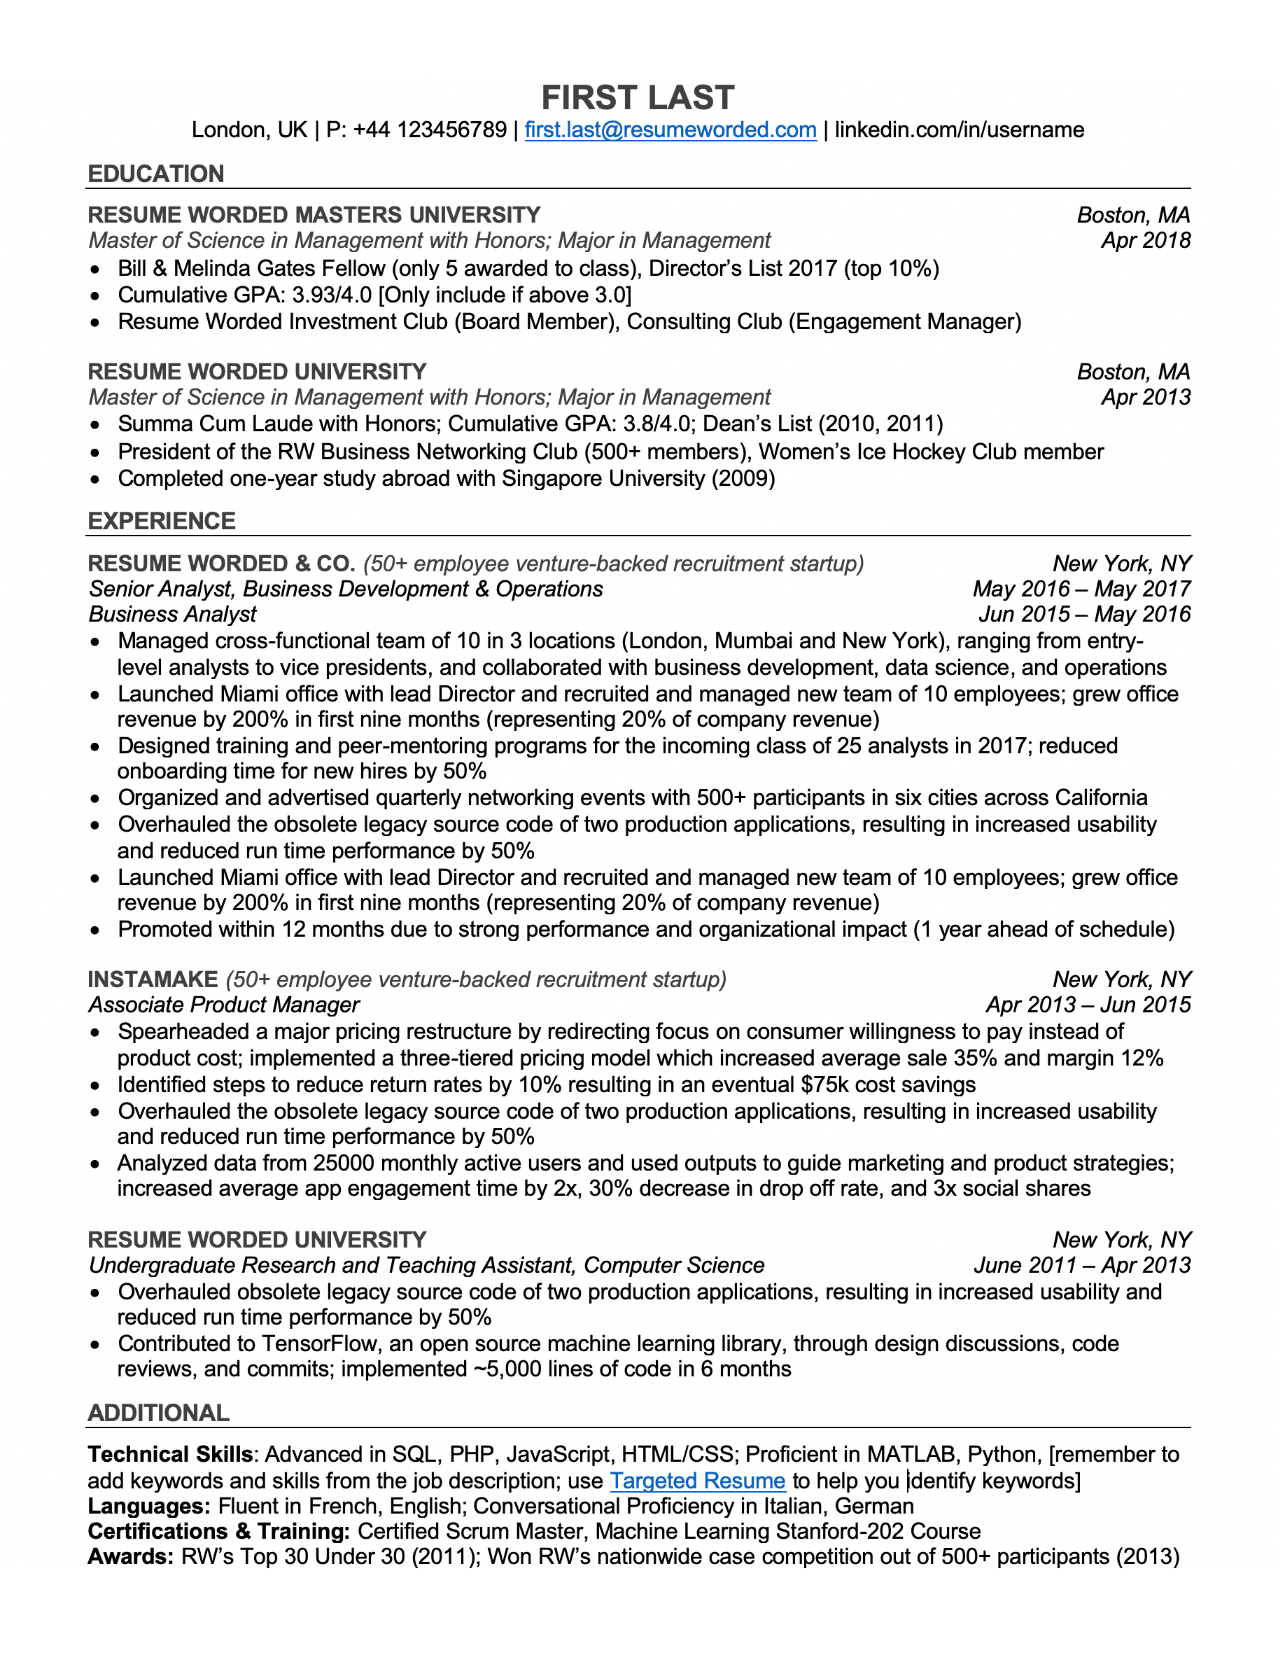 Downloadable free resume template for recent grads